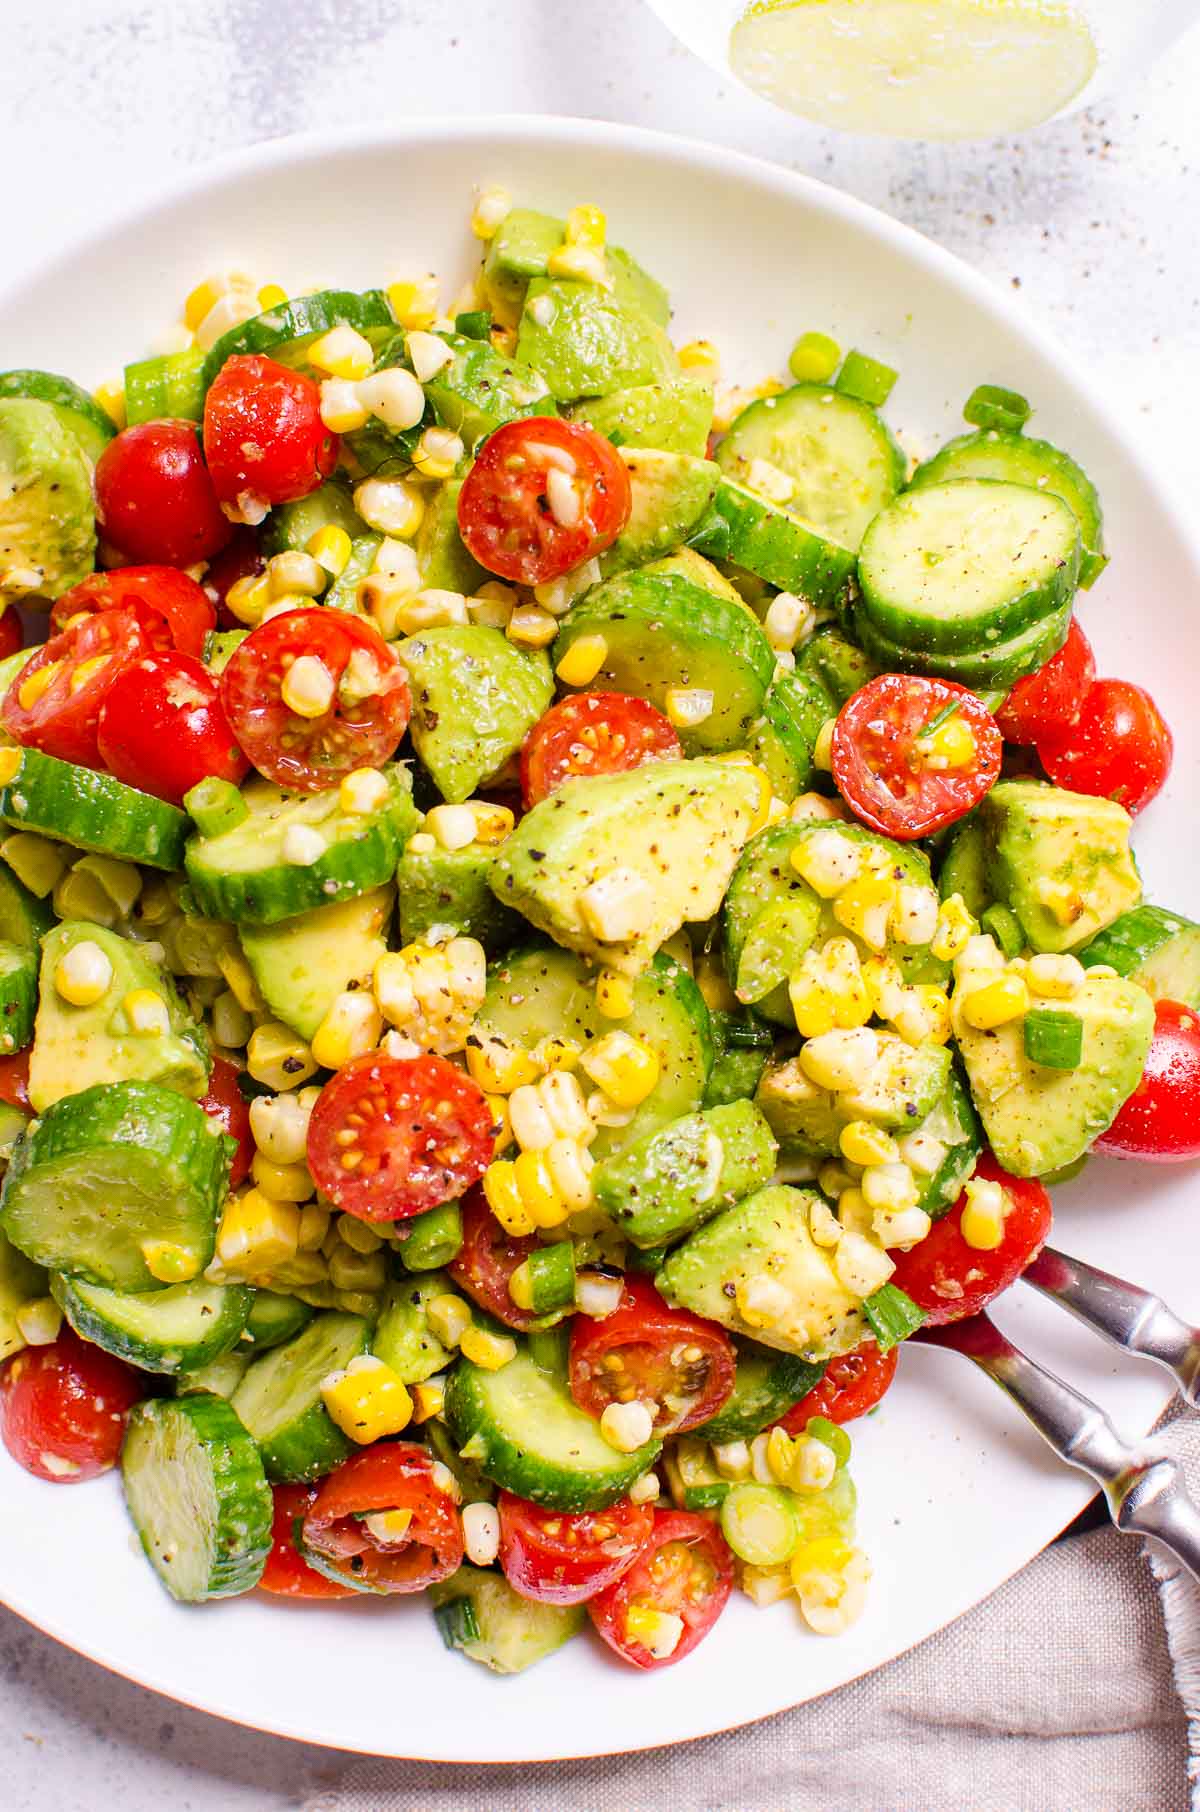 Avocado corn salad on white plate with spoon and fork.